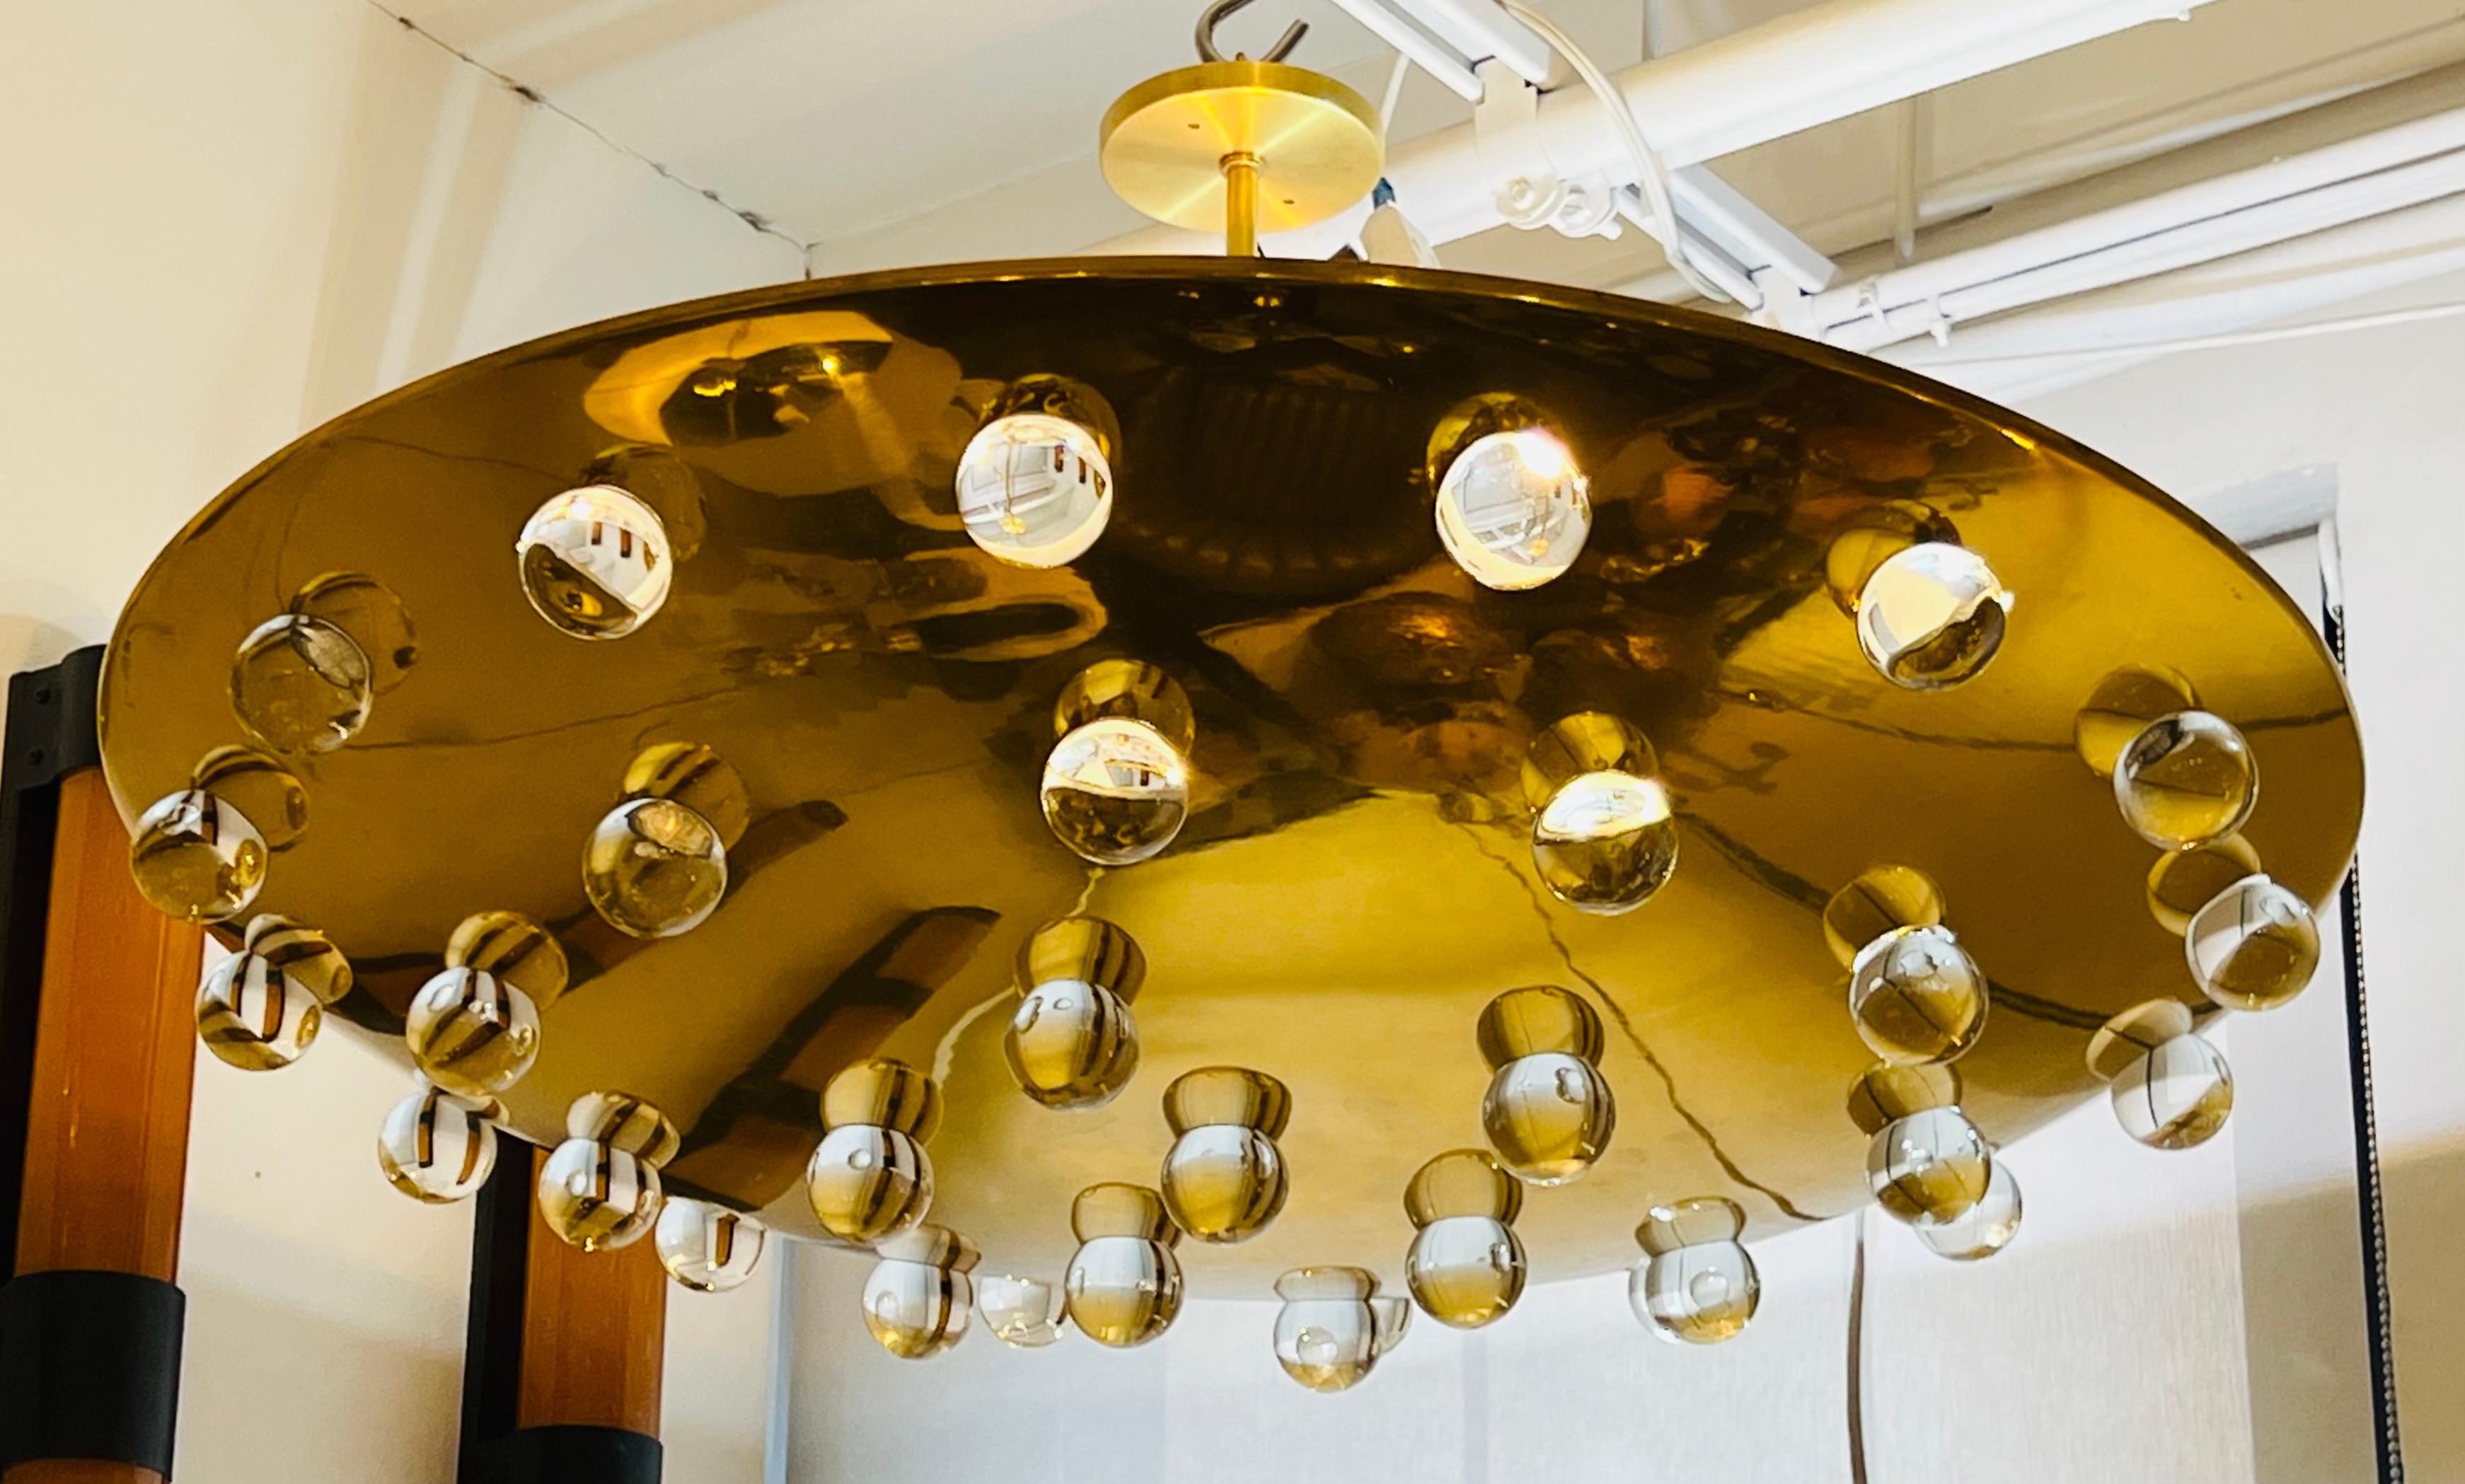 A rare very large 1960s high polished golden shallow bowl with 32 solid crystal glass orbs to emit light. The interior is white enamel and has 4 Starr A sockets. Completely rewired and restored. The ceiling pole can be cut to make closer to the